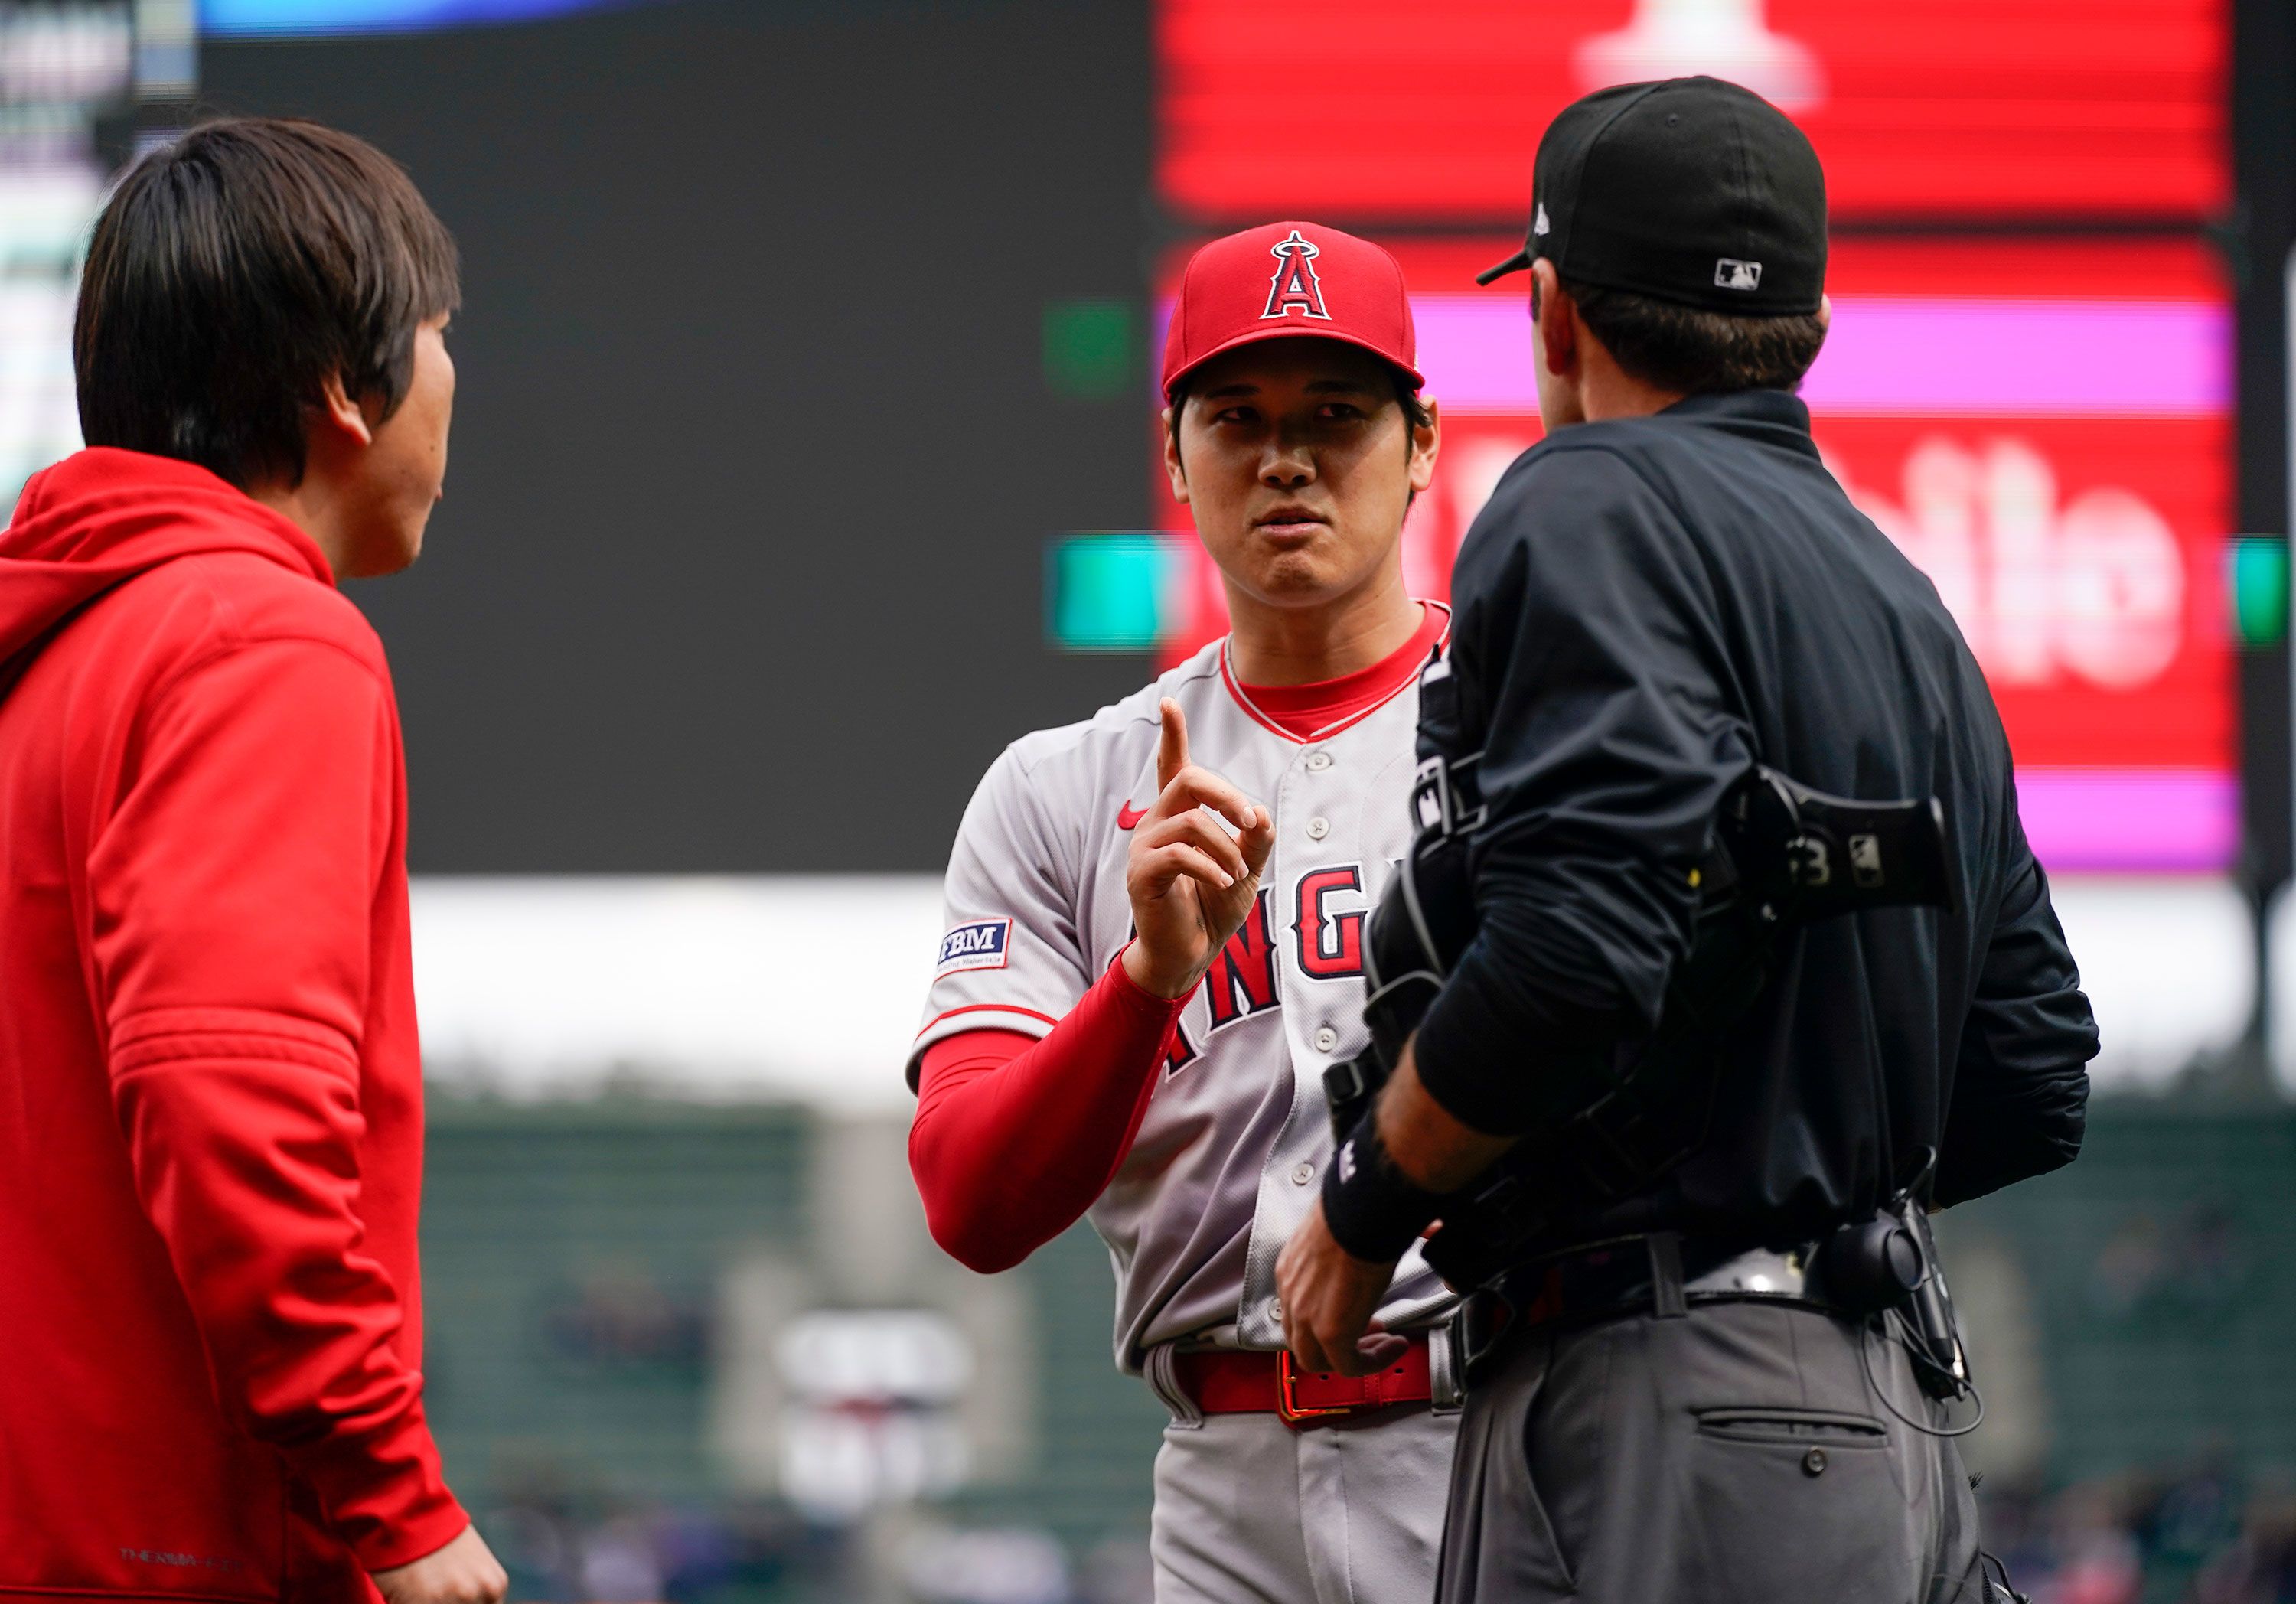 Shohei Ohtani: Los Angeles Angels star gets two pitch clock